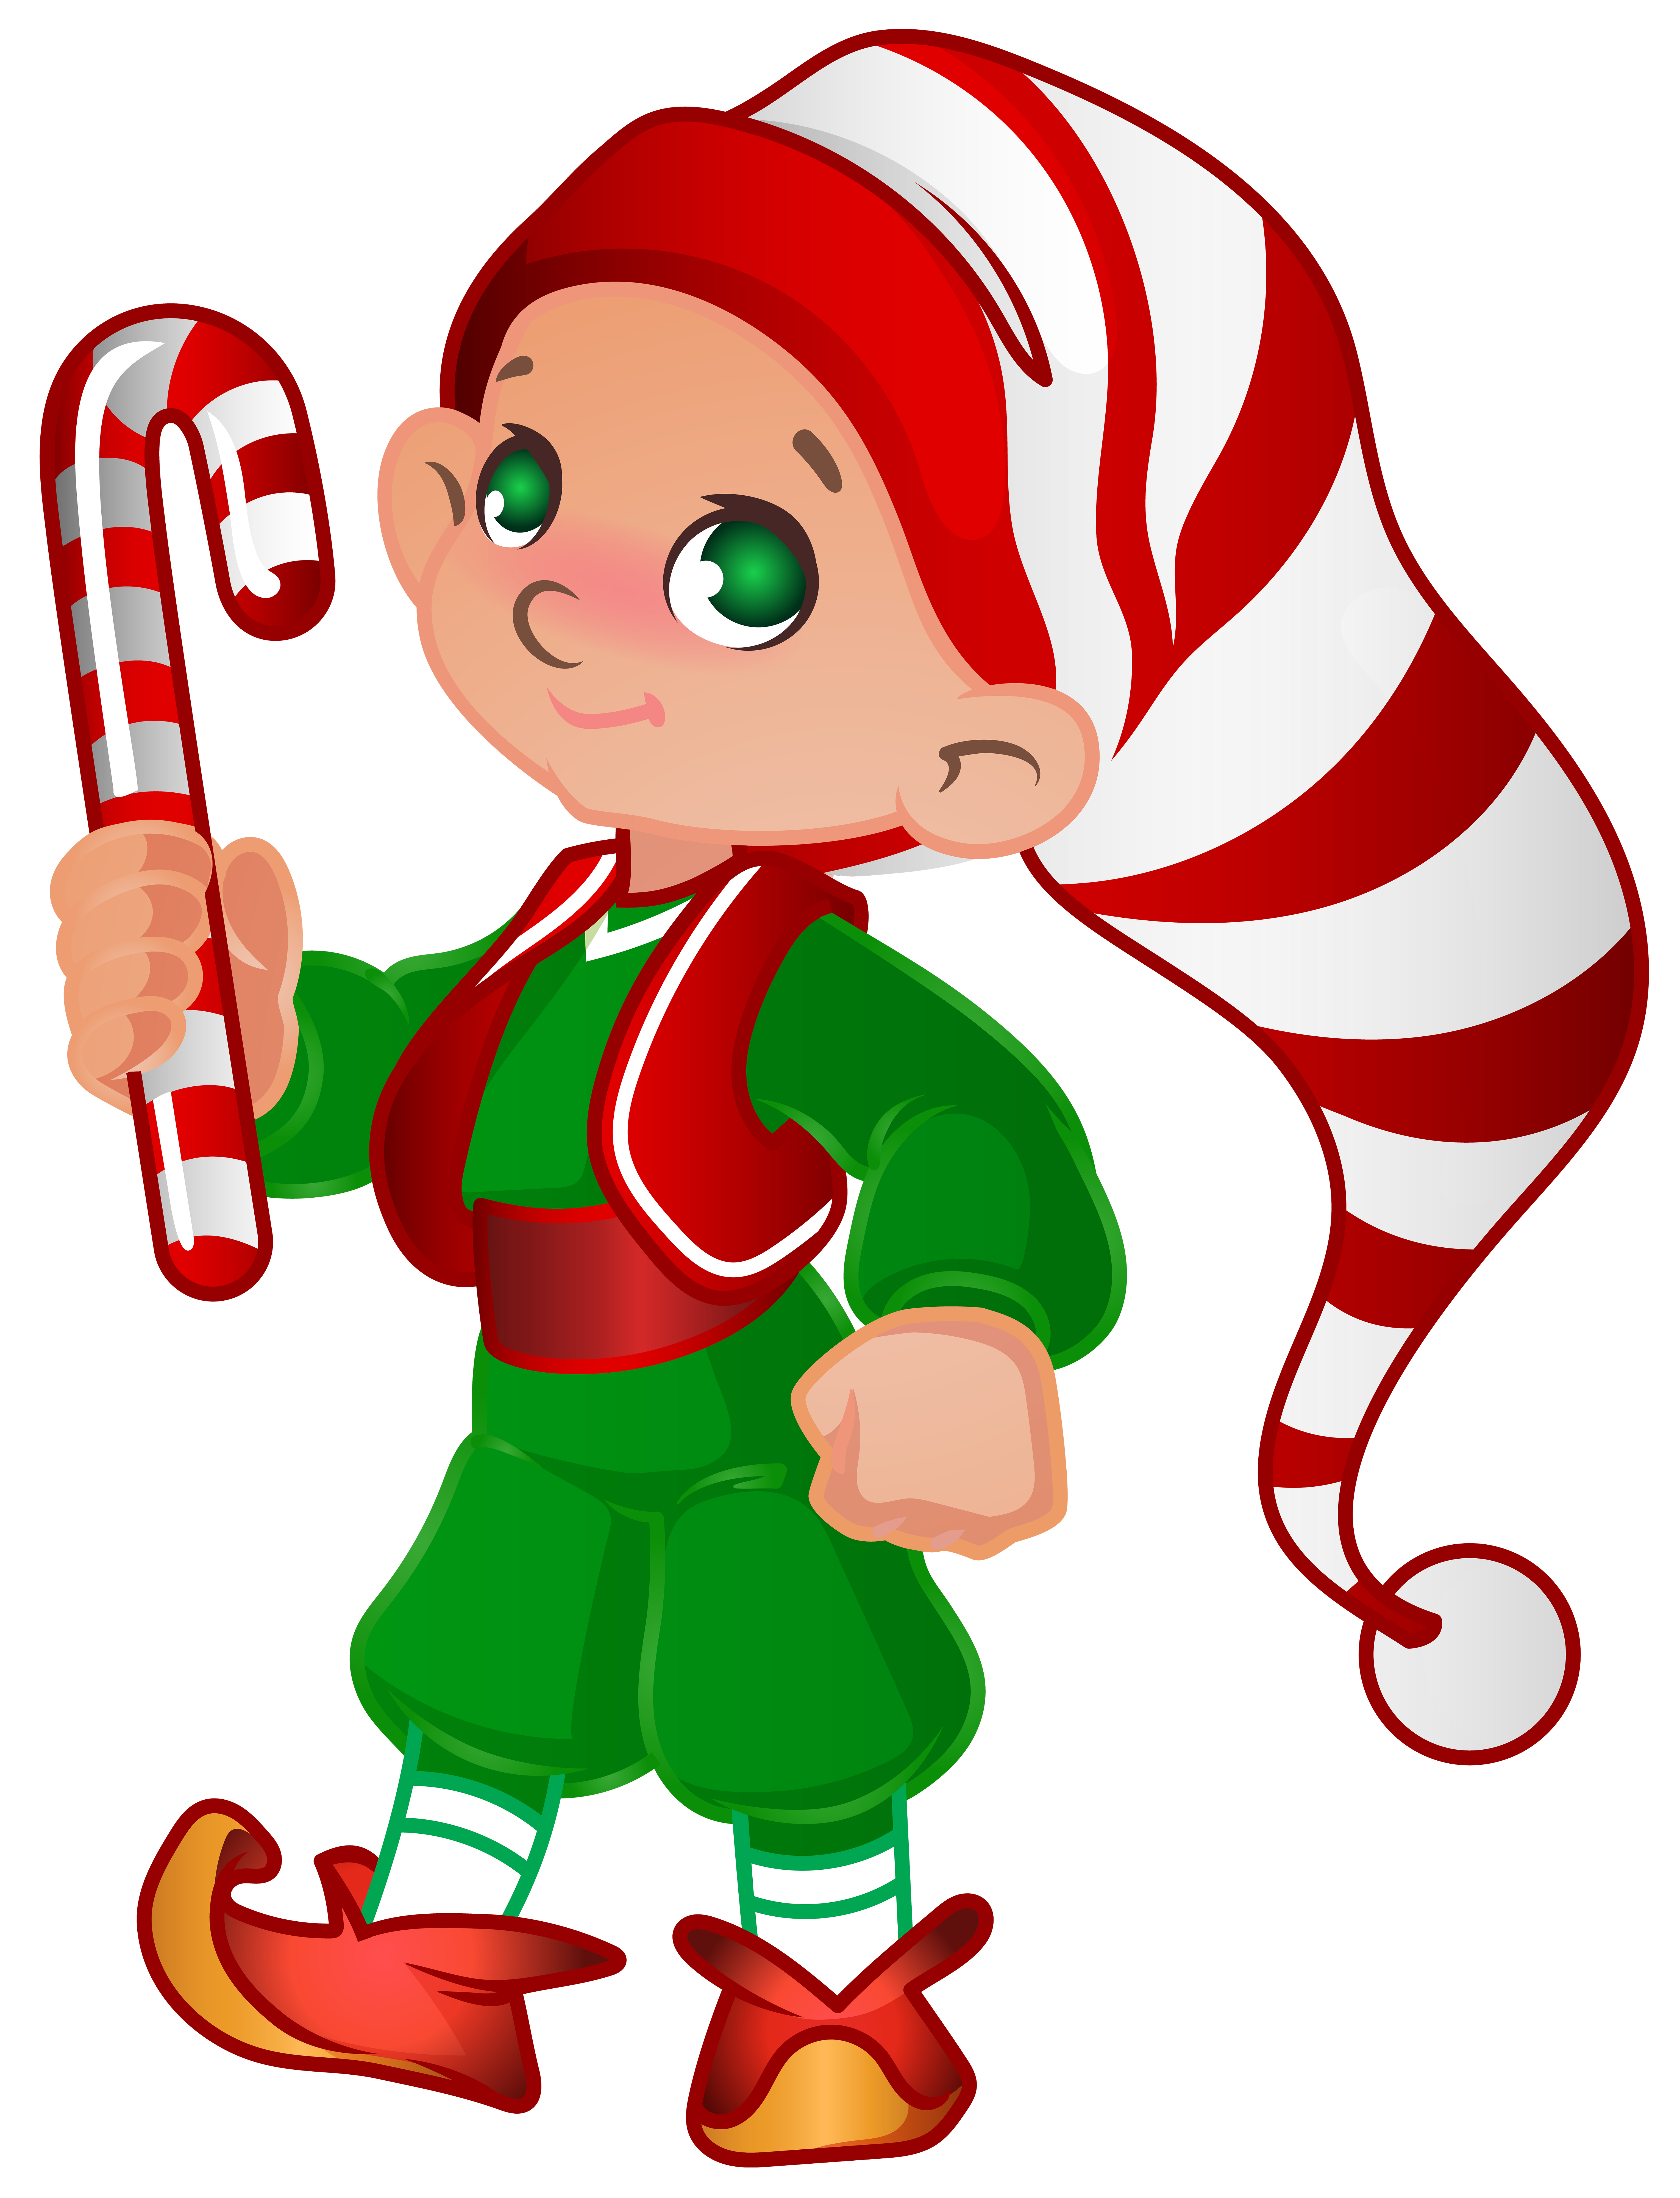 Transparent Elf On The Shelf Clipart The Elf On The Shelf Png & Free